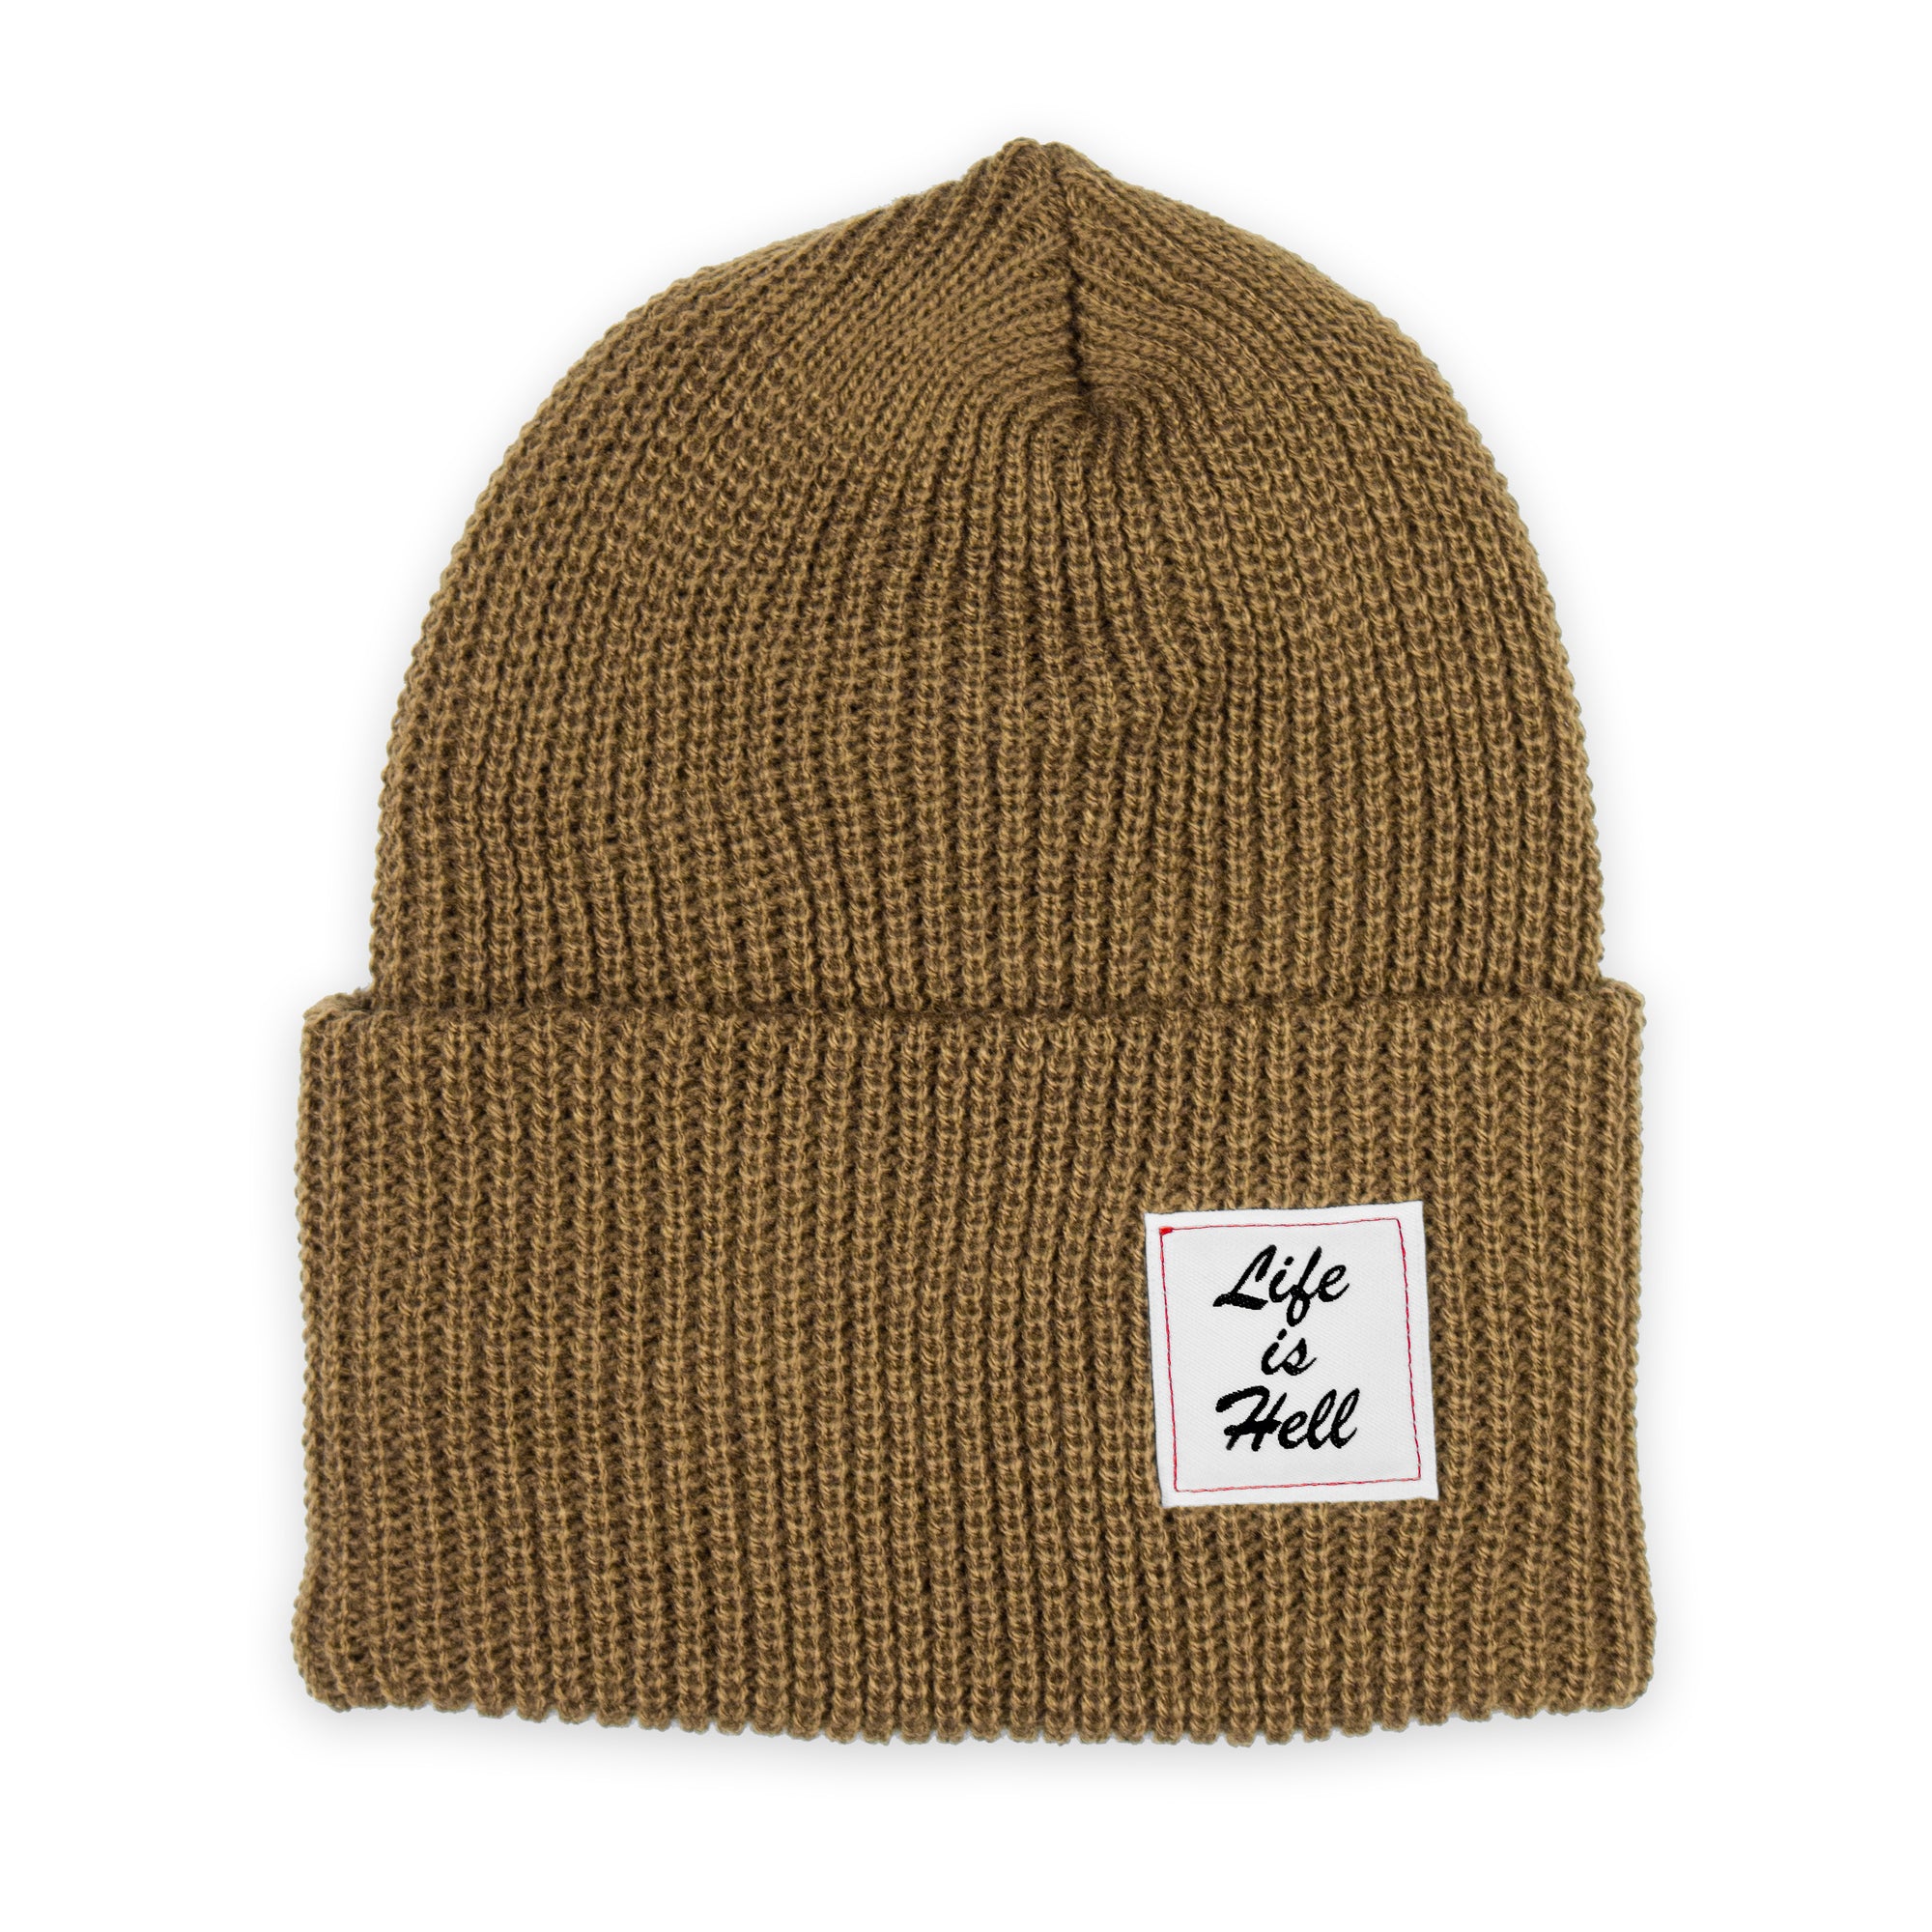 Photo of the "Life is Hell" Beanie by No Fun®.  Product is photographed against a white background.  Beanie is tan, and features a small white woven label on the cuff that reads "Life Is Hell".  Label is white, with black text, and red contrasting stitching.